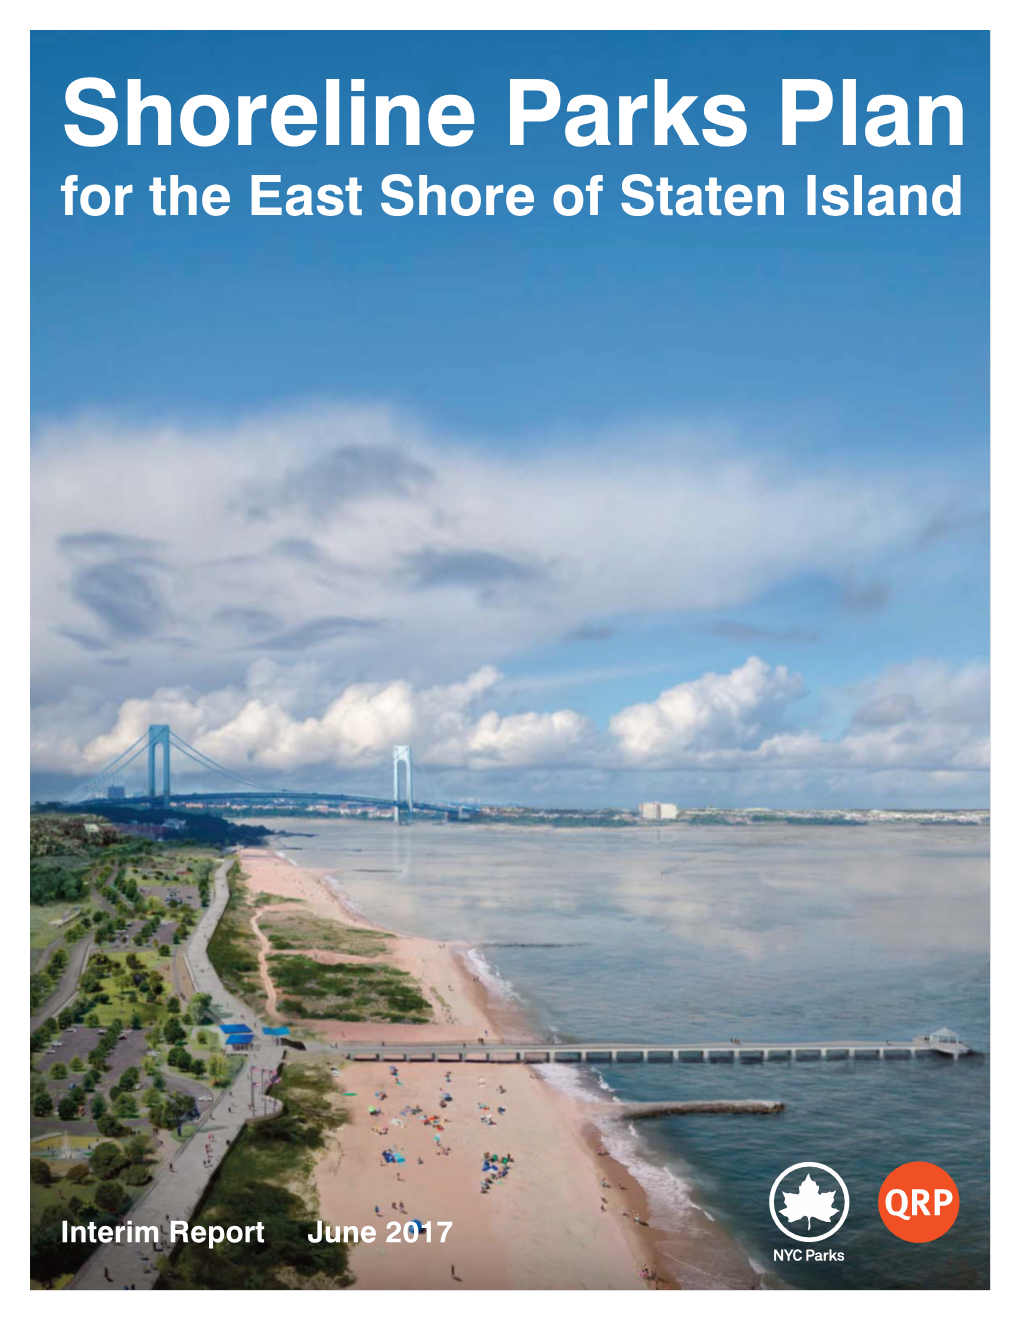 Shoreline Parks Plan a Long-Term Plan for Improving NYC Parkland Along the East Shore of Staten Island